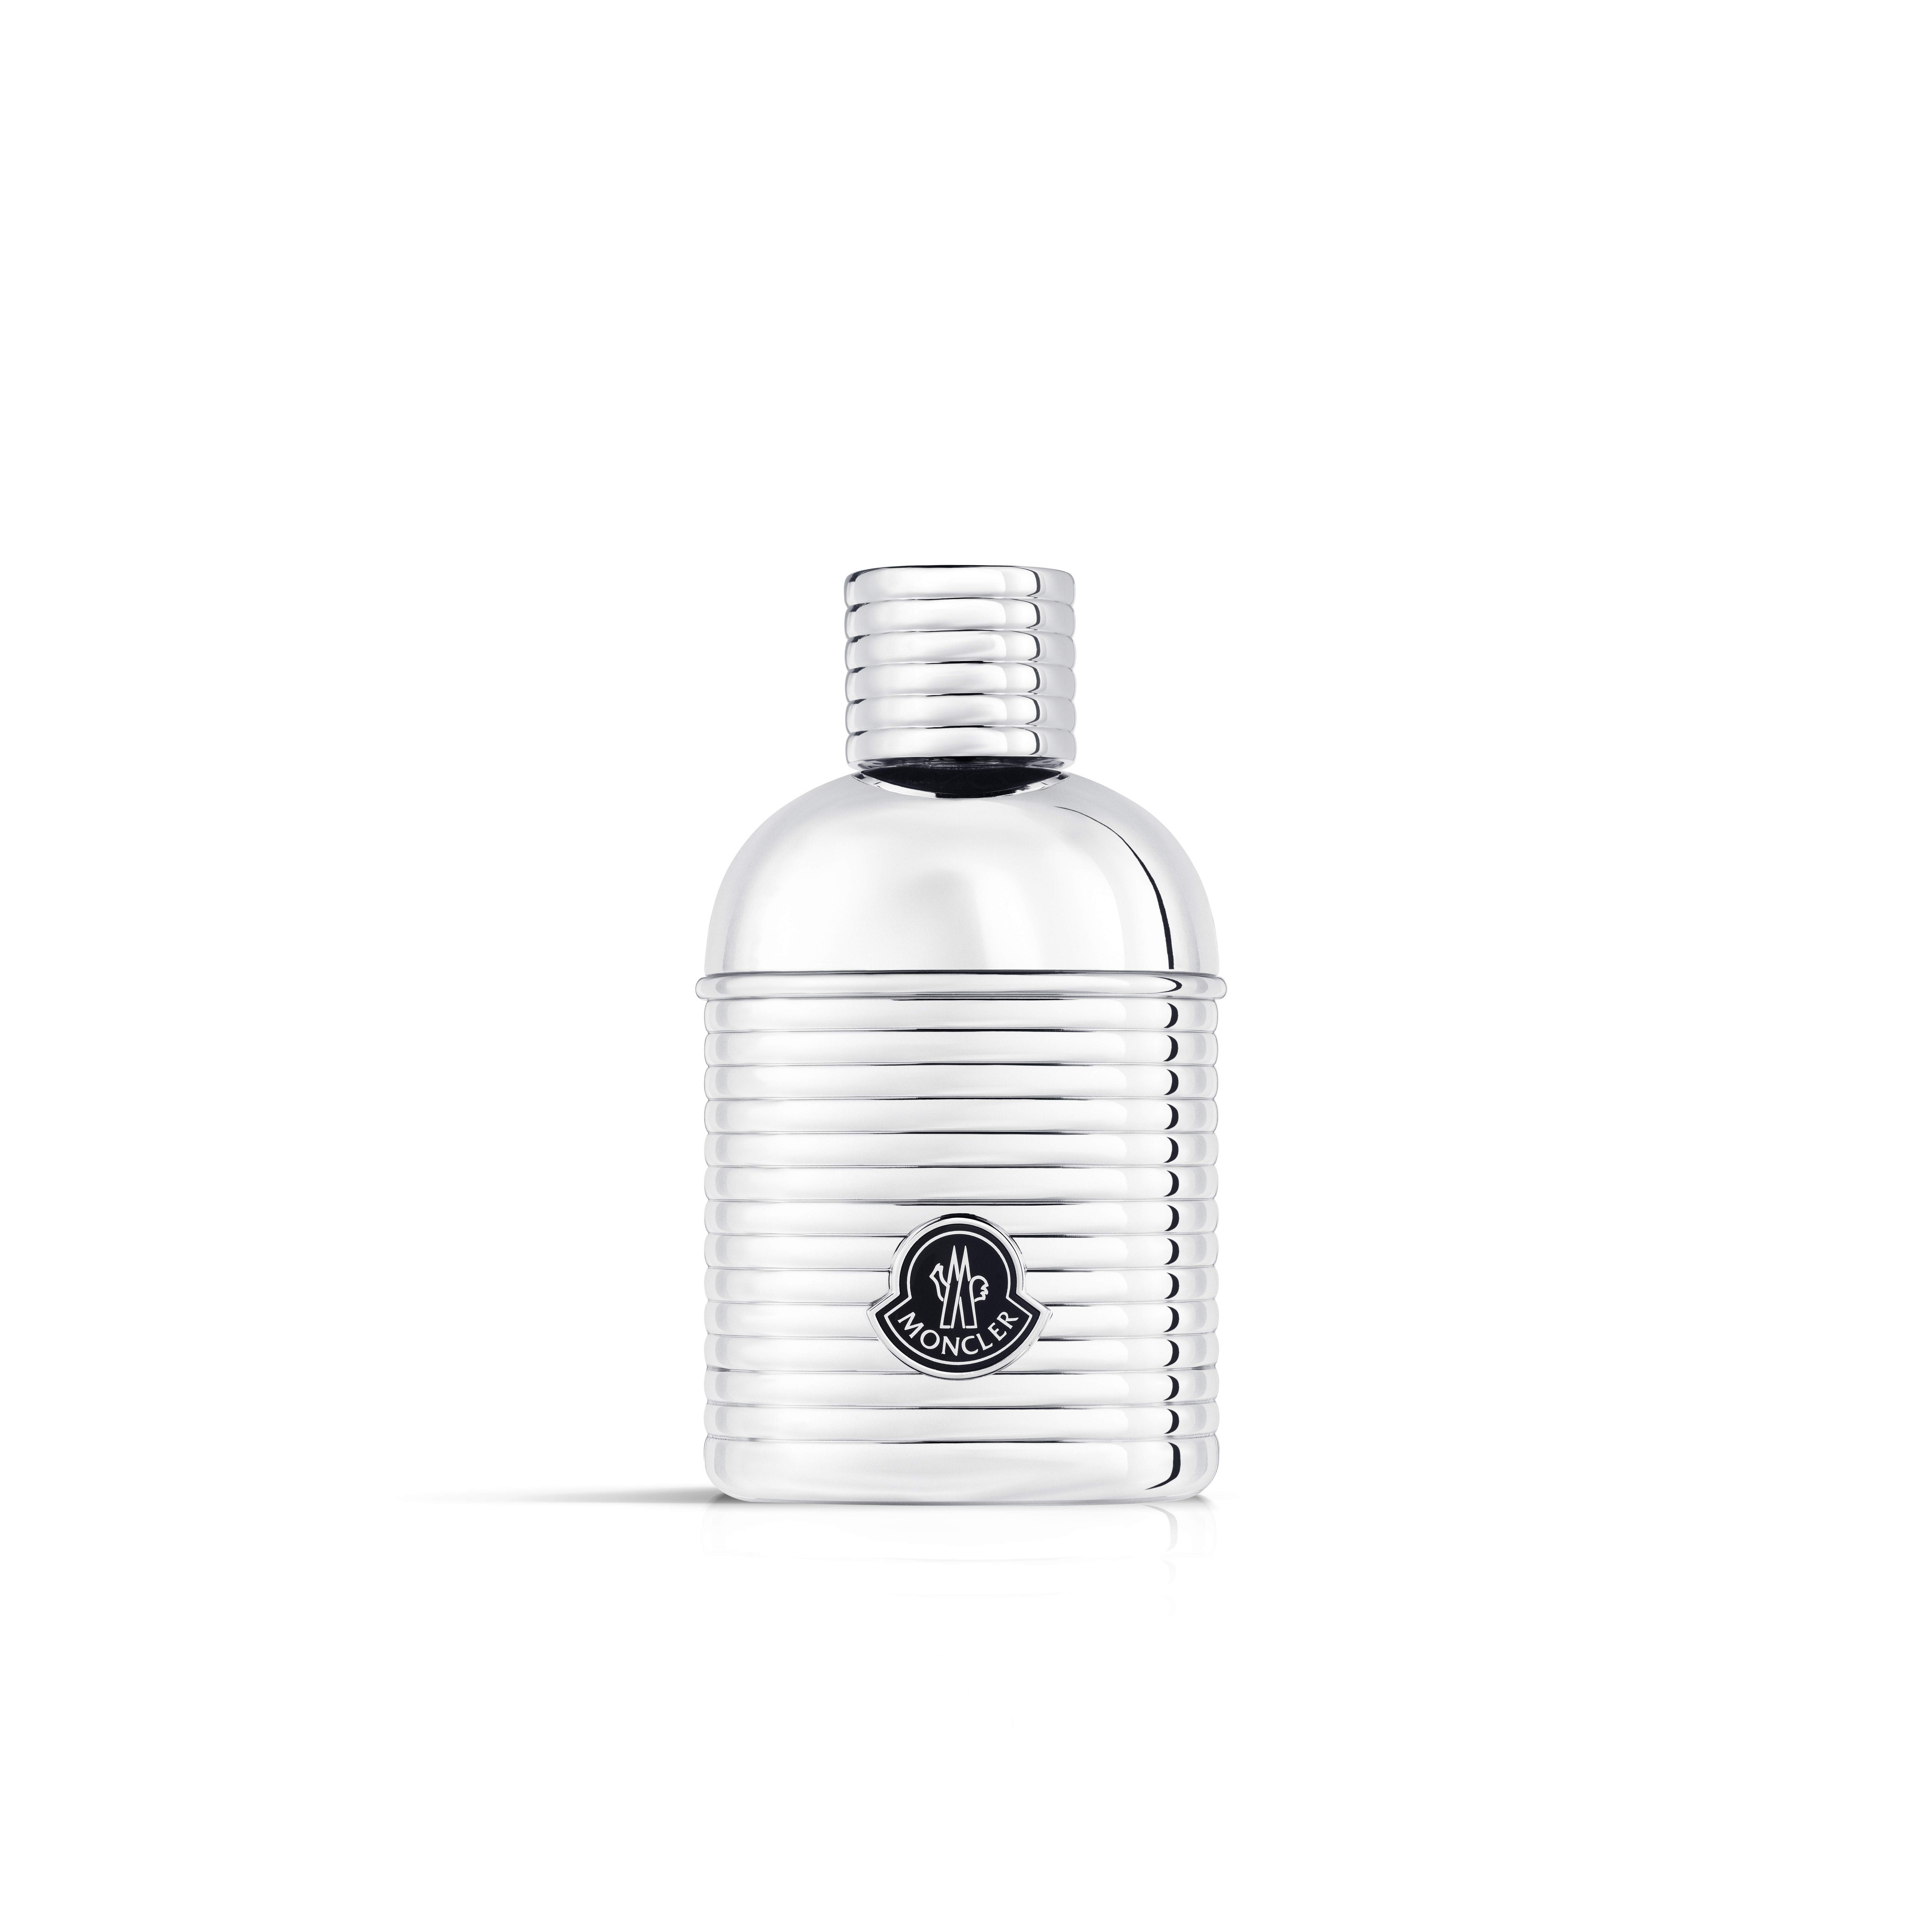 Moncler Pour Homme EDP 100ml, Bianco, large image number 2